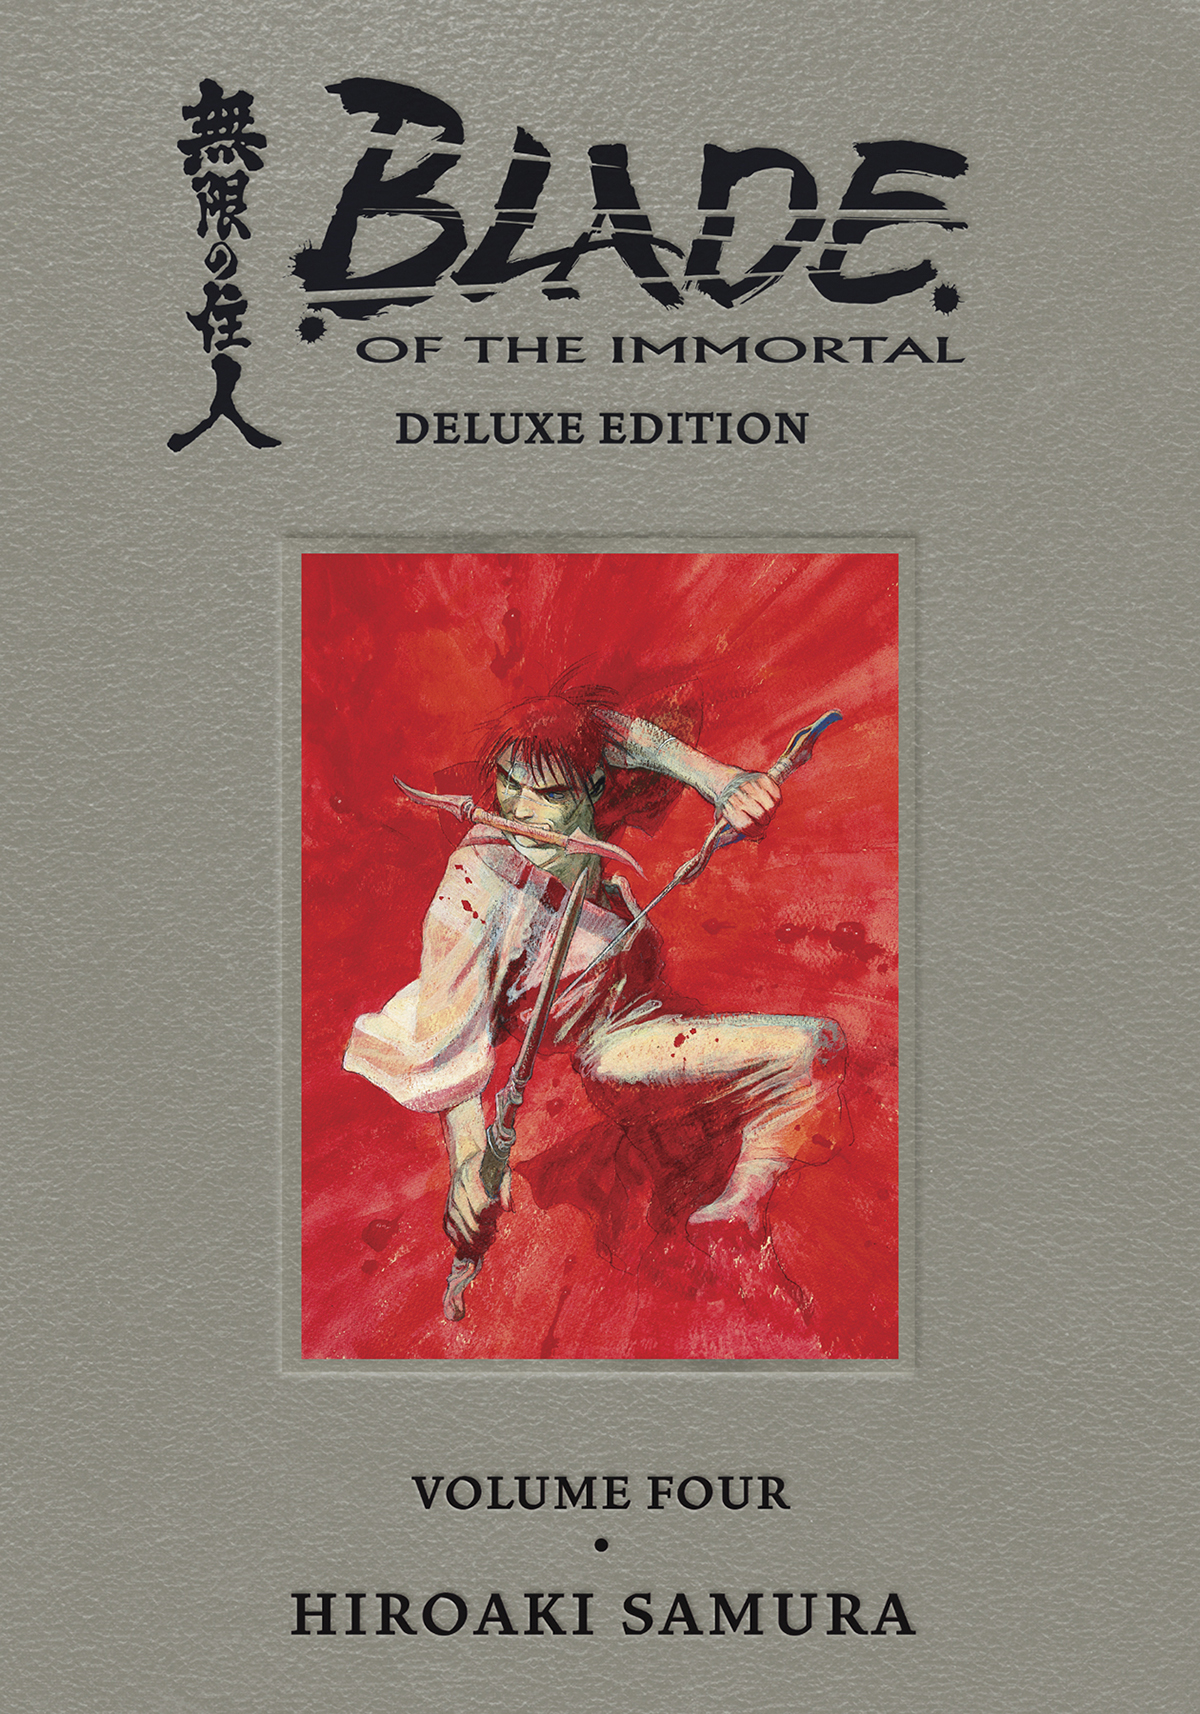 Blade of the Immortal Deluxe Edition Hardcover Volume 4 (Mature)